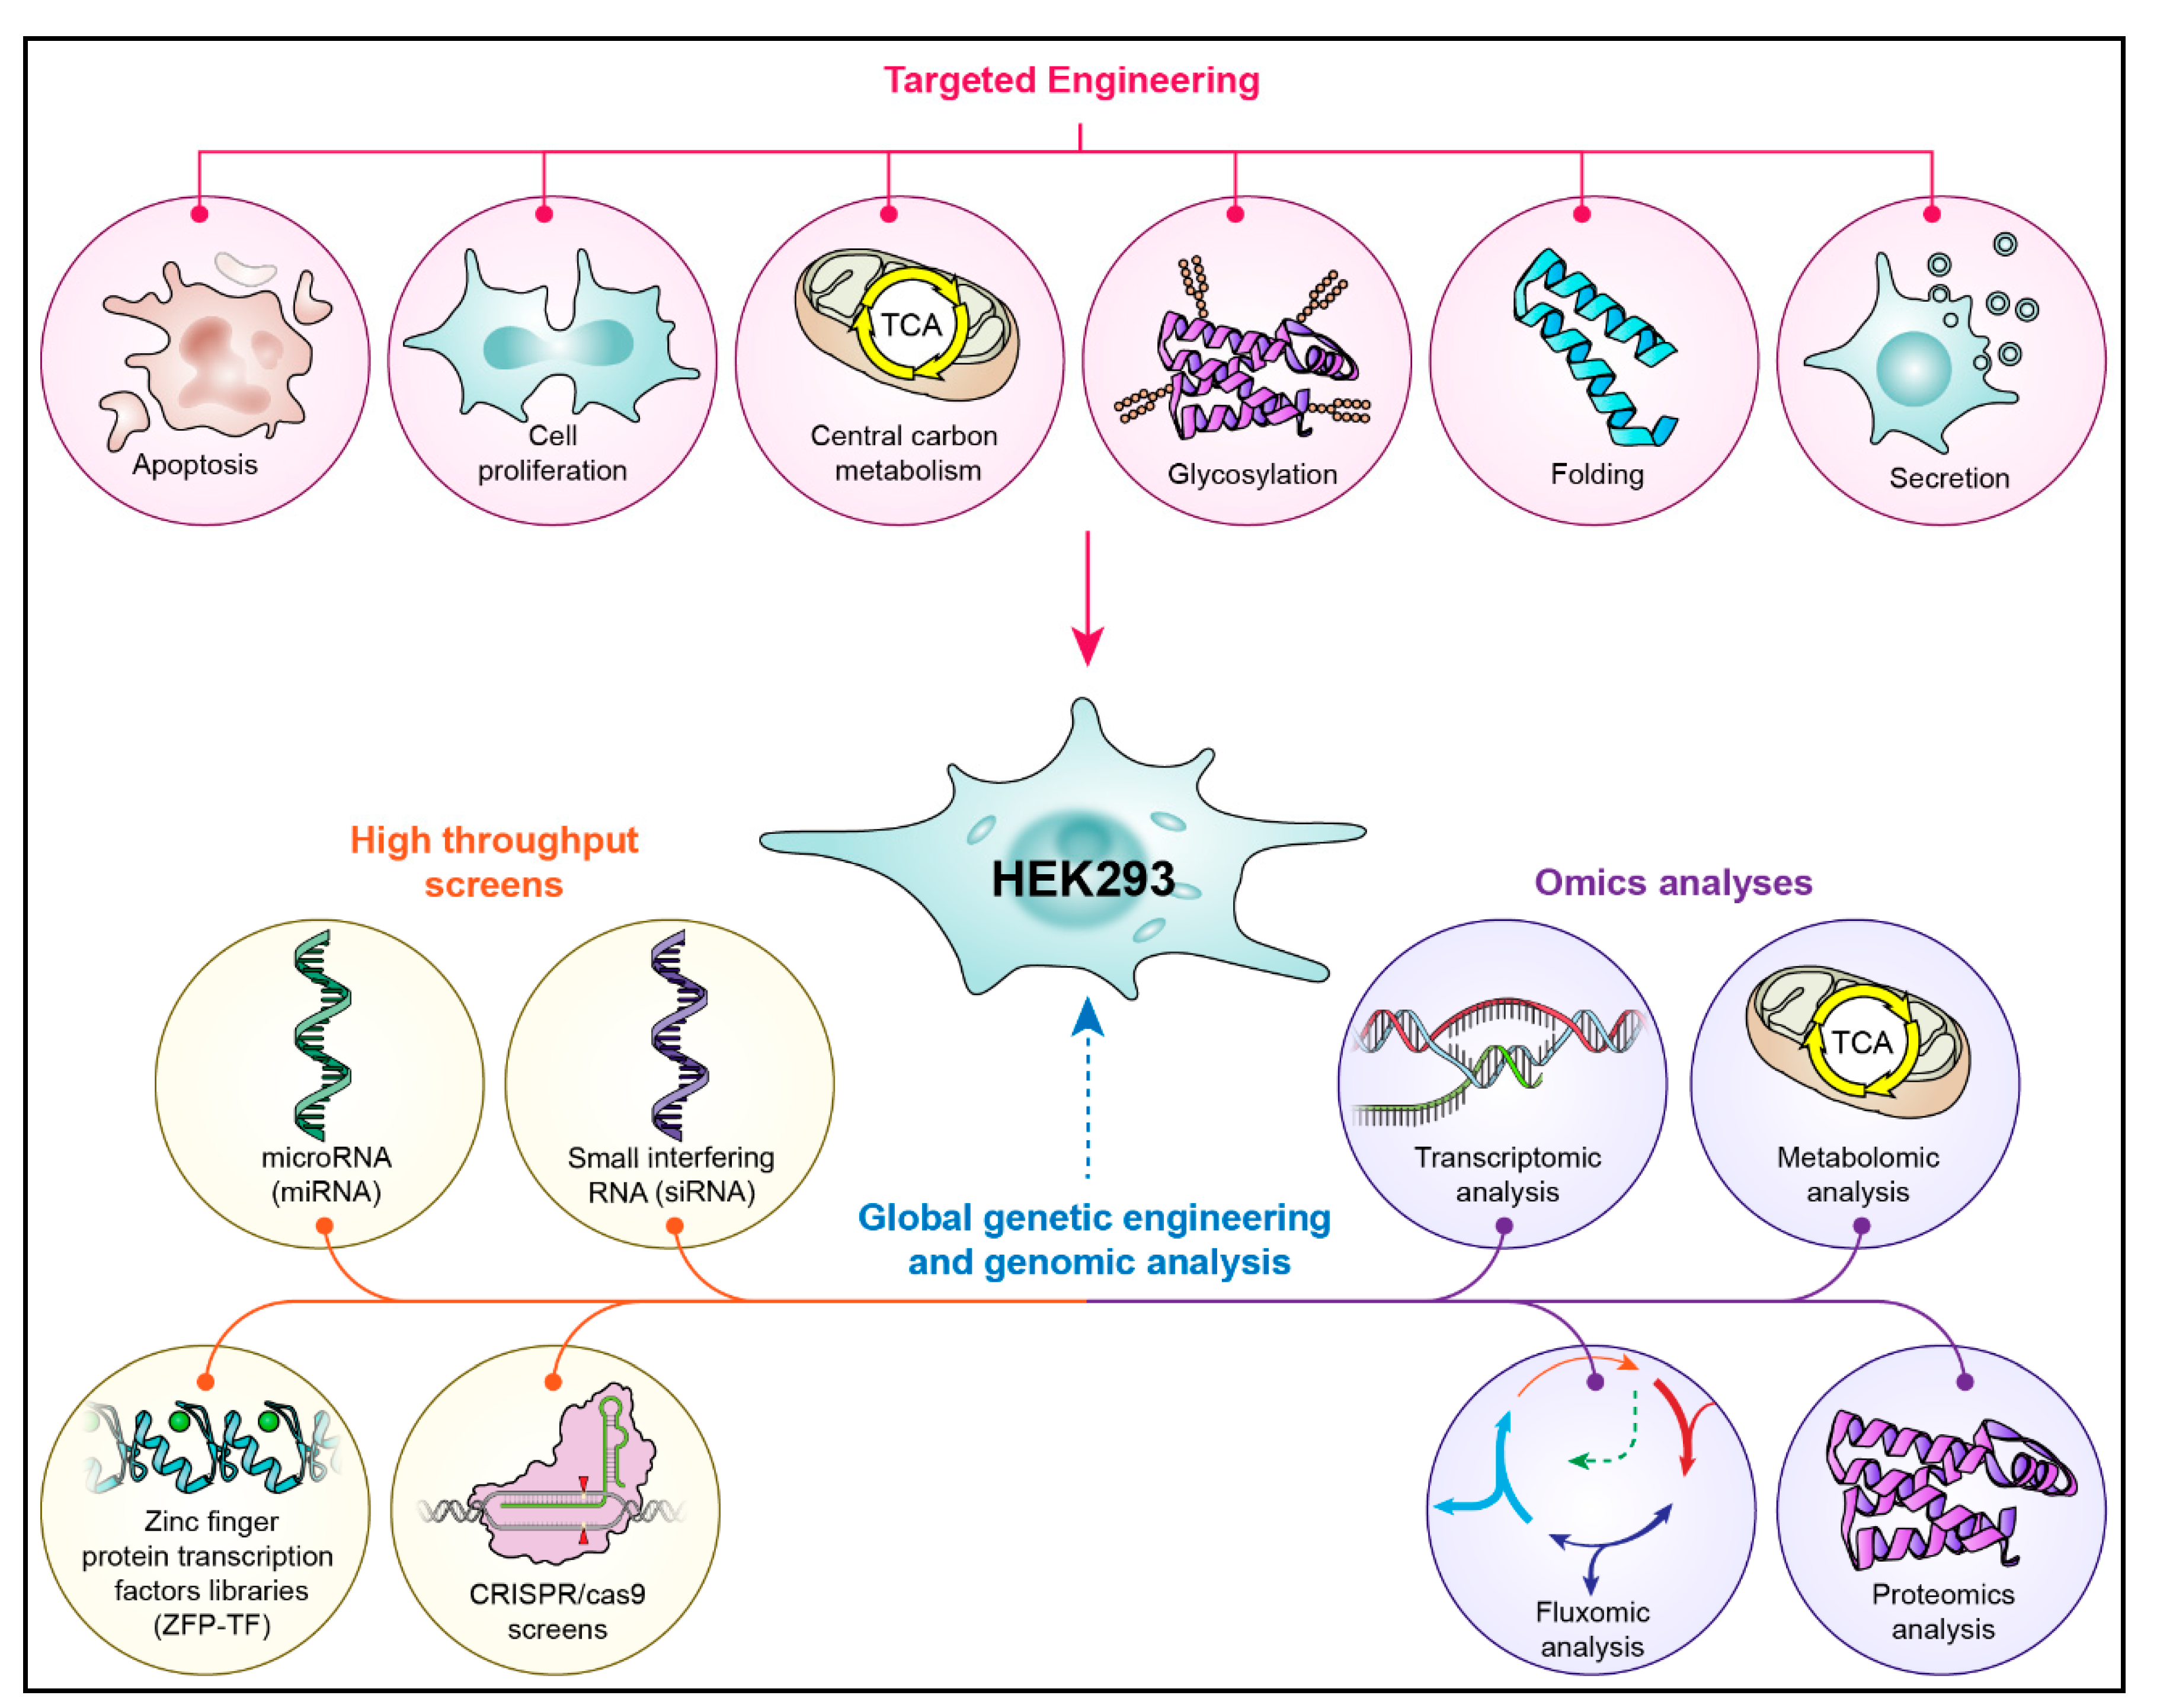 Cells | Full-Text Affecting HEK293 Cell and Production Performance by Modifying the Expression of Specific Genes